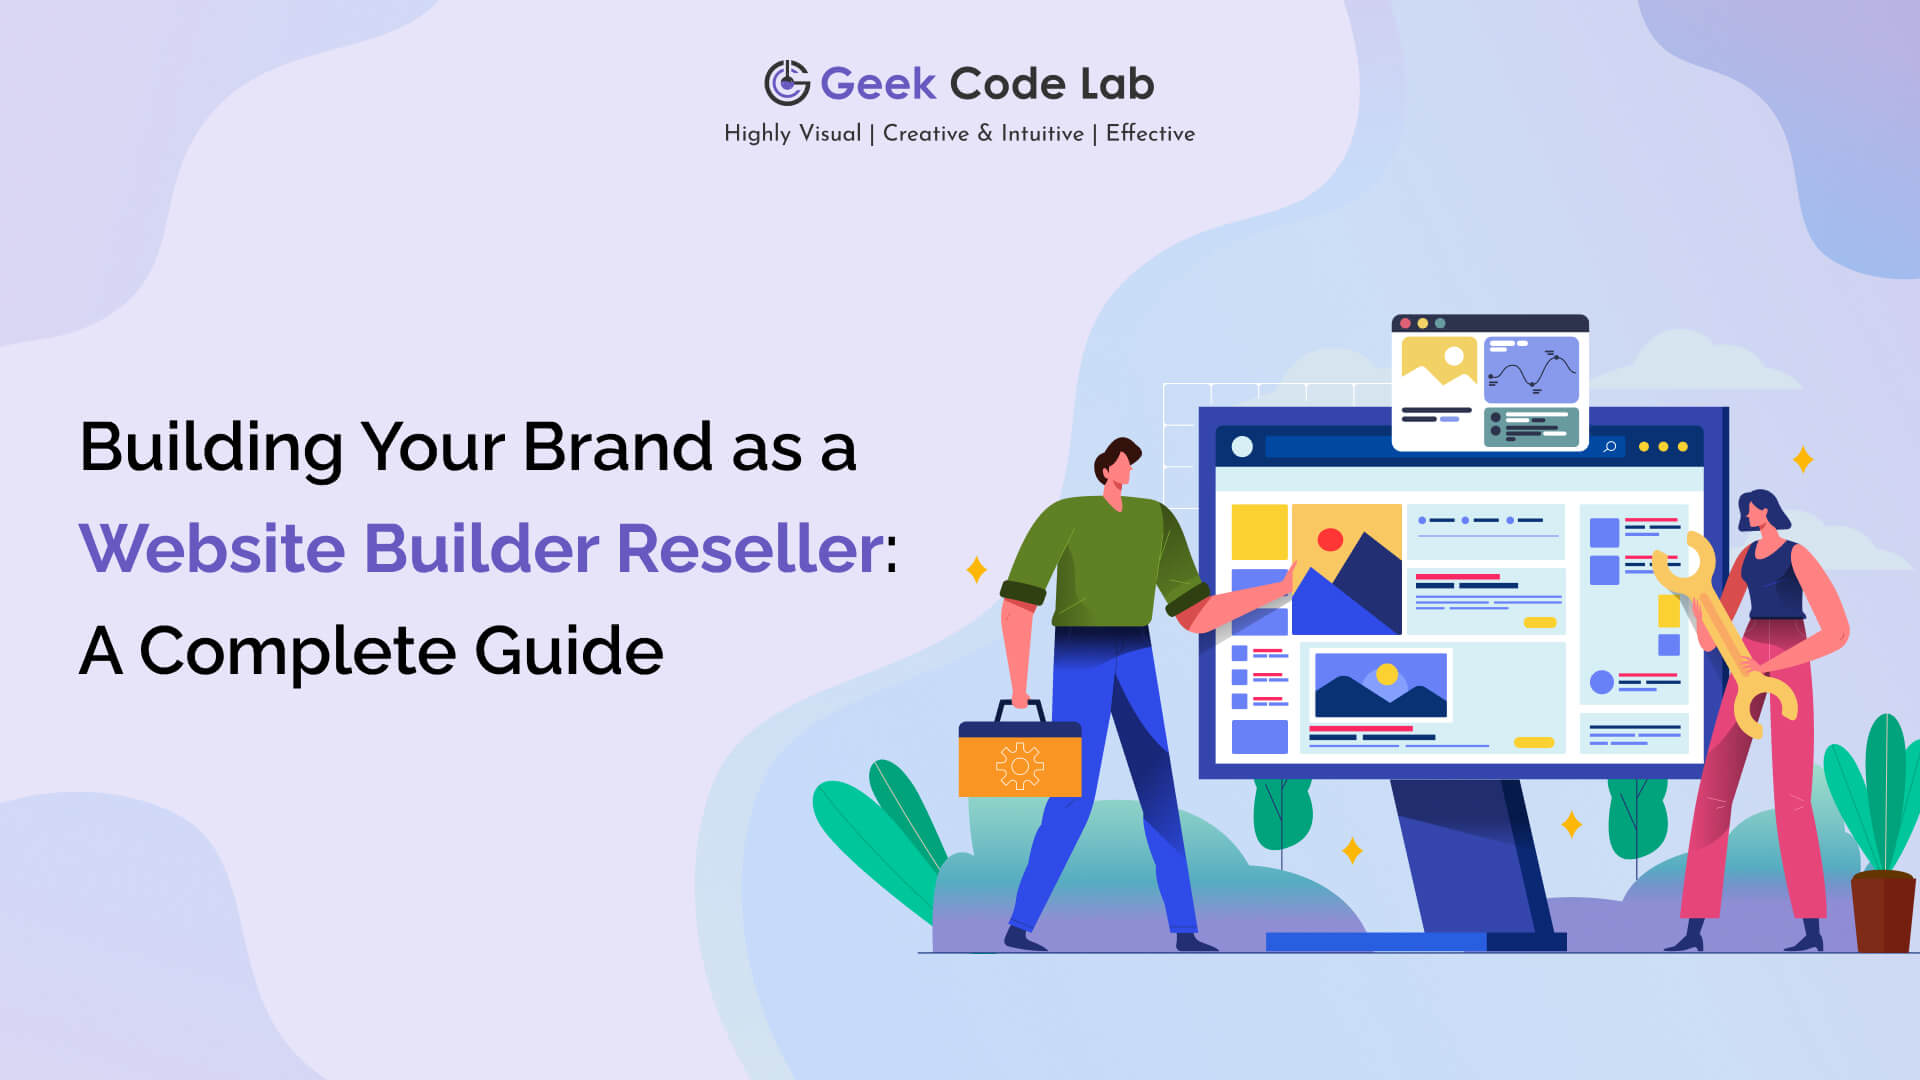 How to Build Your Brand as a Website Builder Reseller?